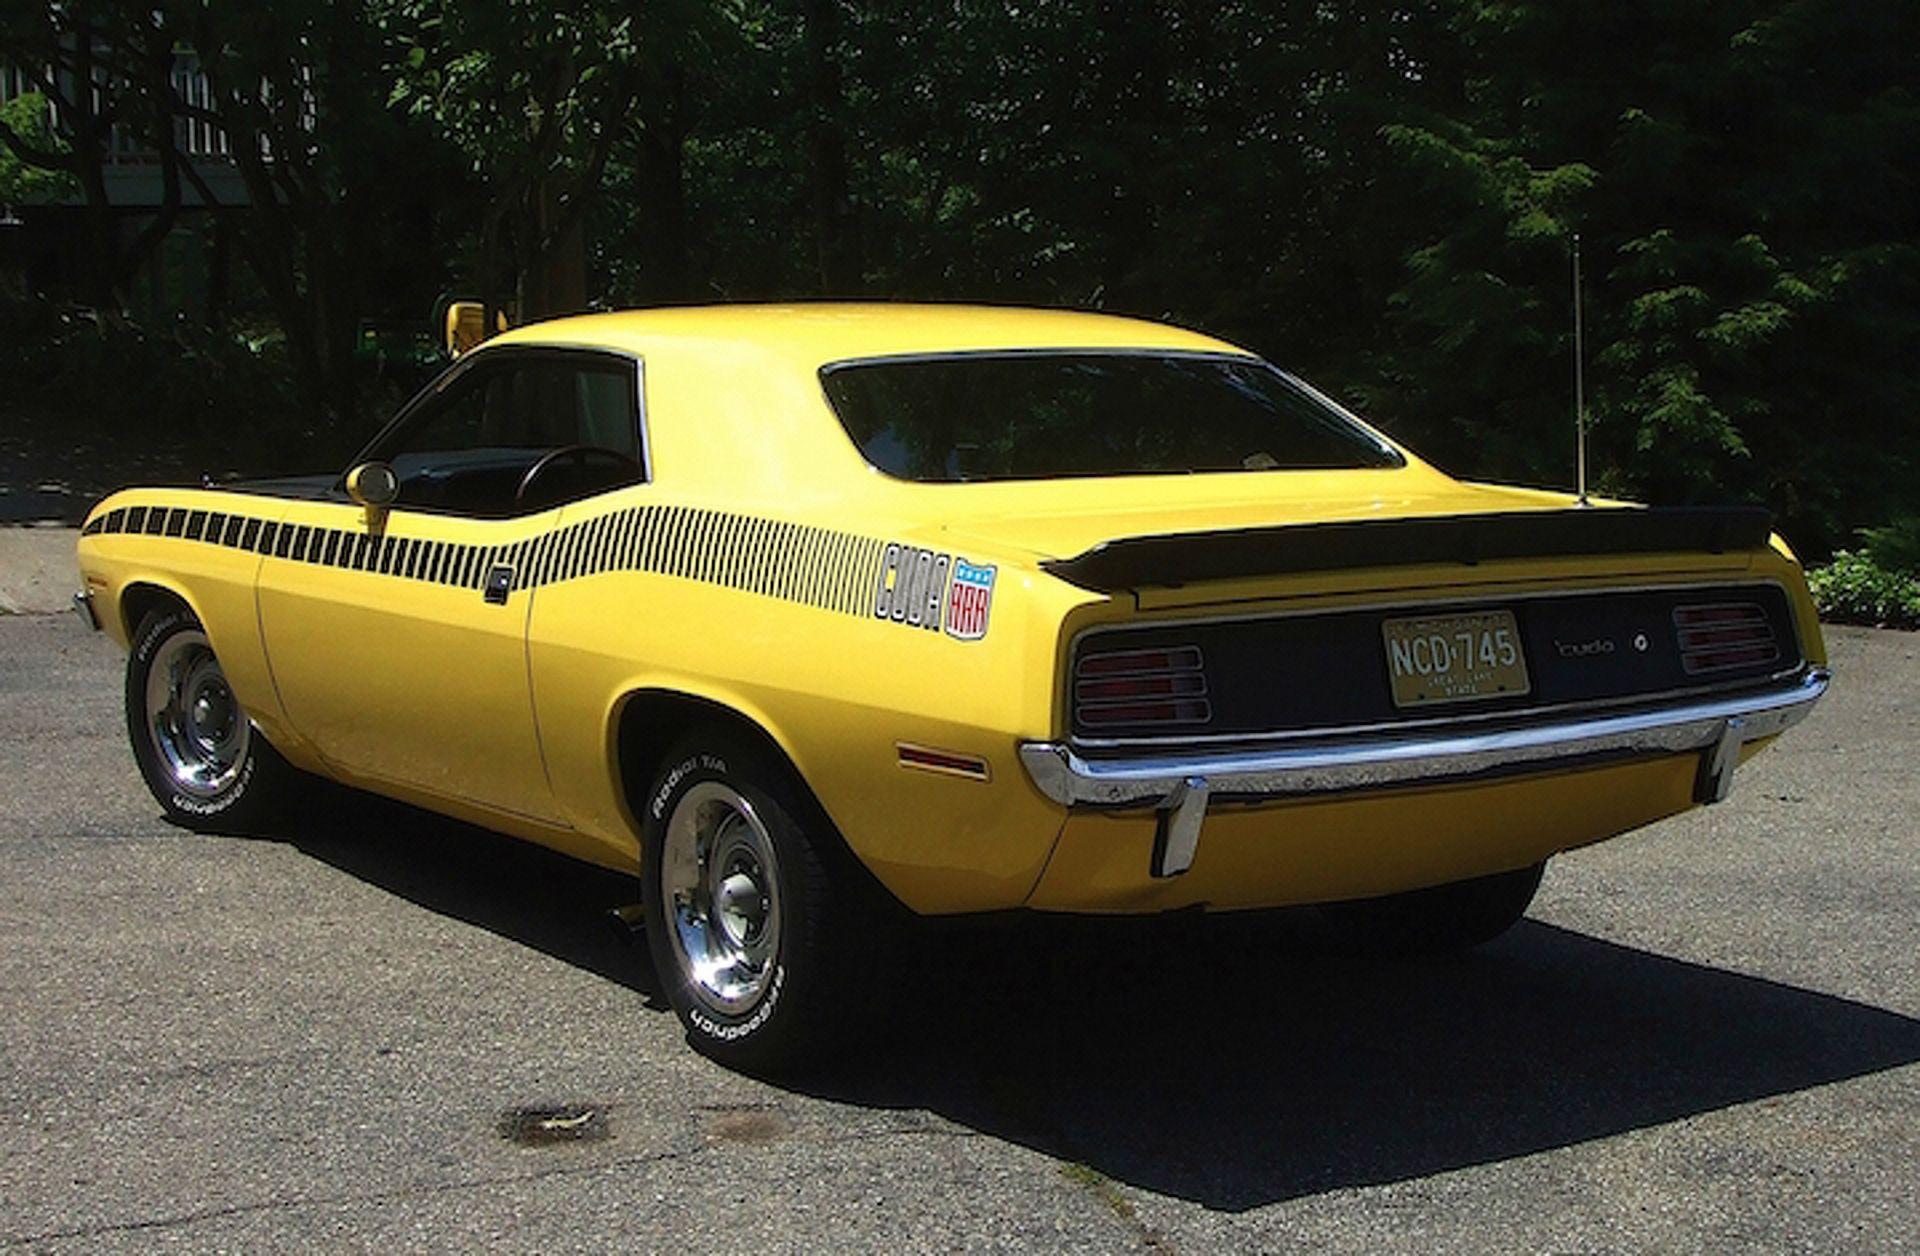 1970 Plymouth Logo - History of the Plymouth Barracuda: In 1970, The 'Cuda Came Into Its Own